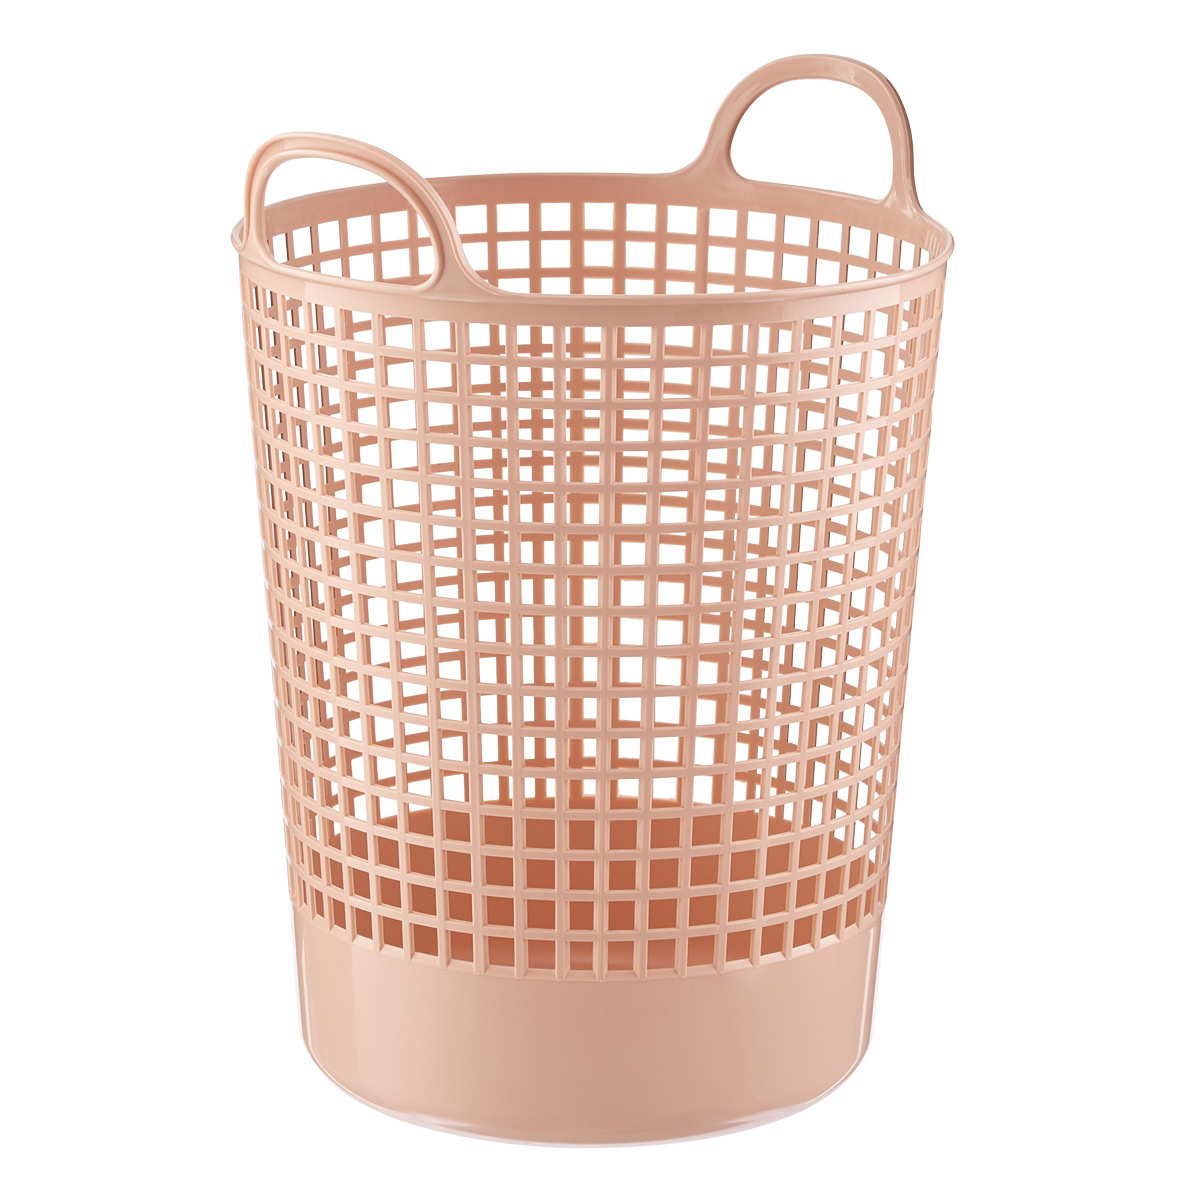 Like-It Round Eco-Plastic Laundry Basket | The Container Store